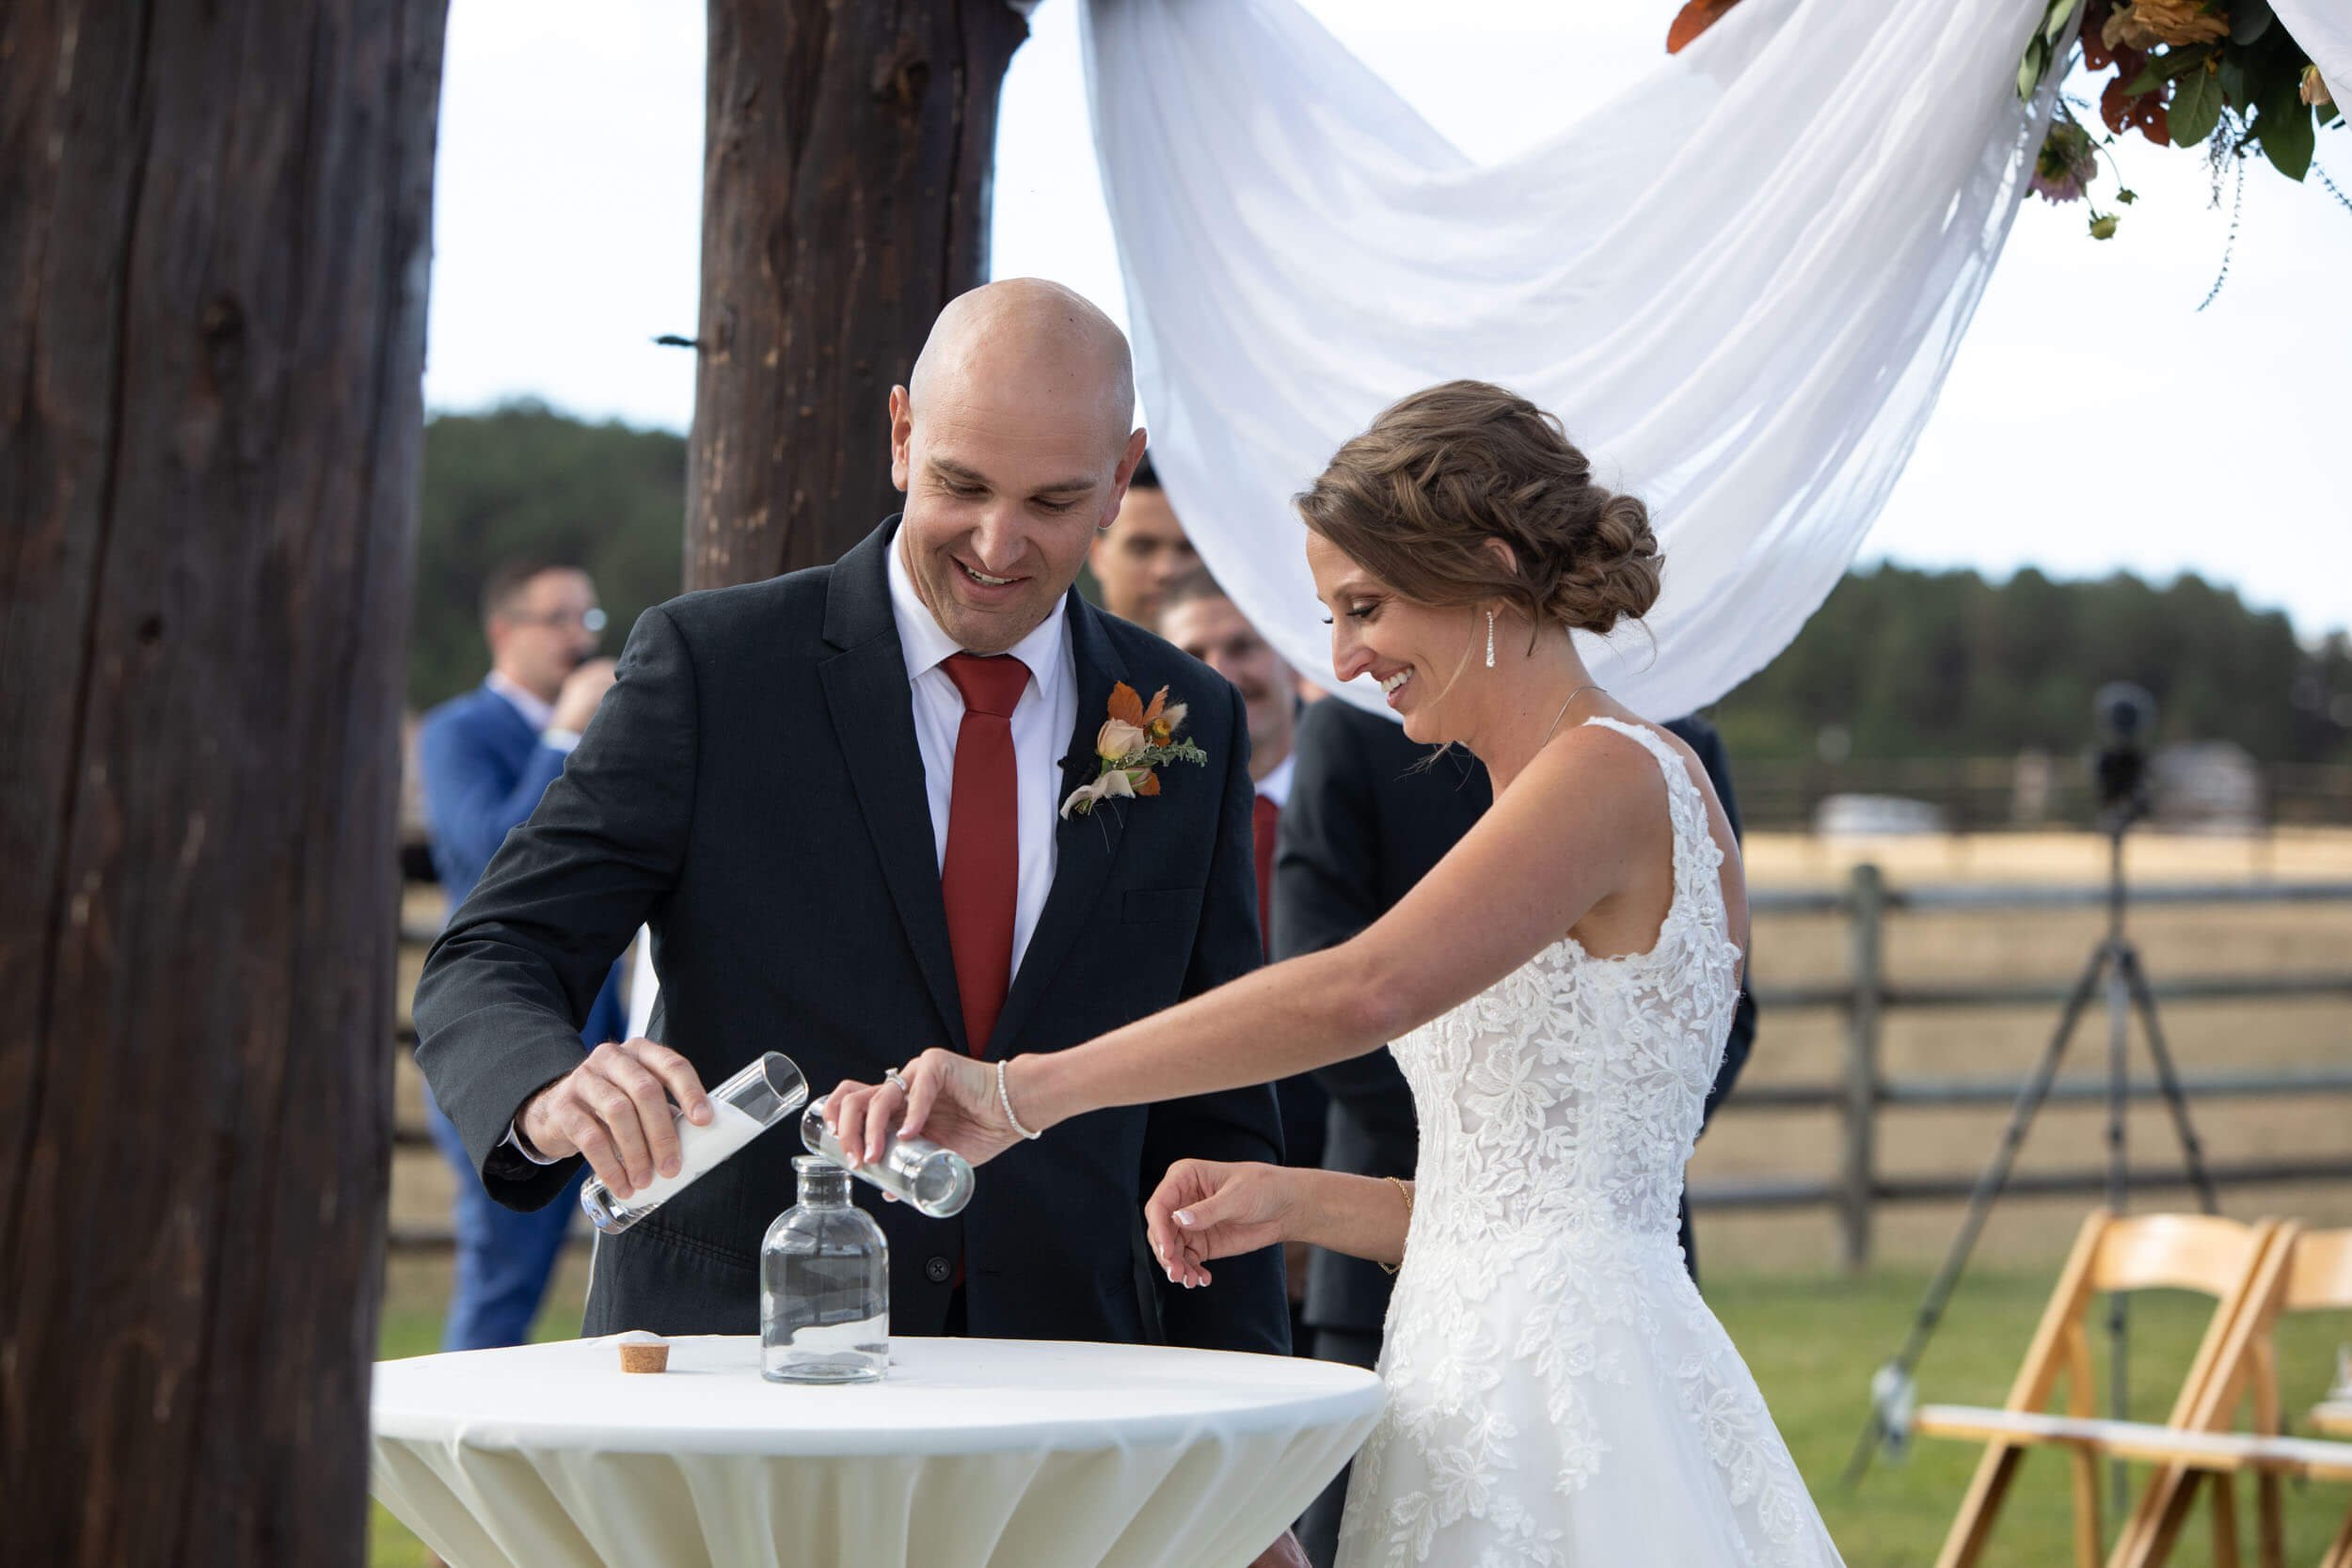 Ceremony at Spruce Mountain Ranch